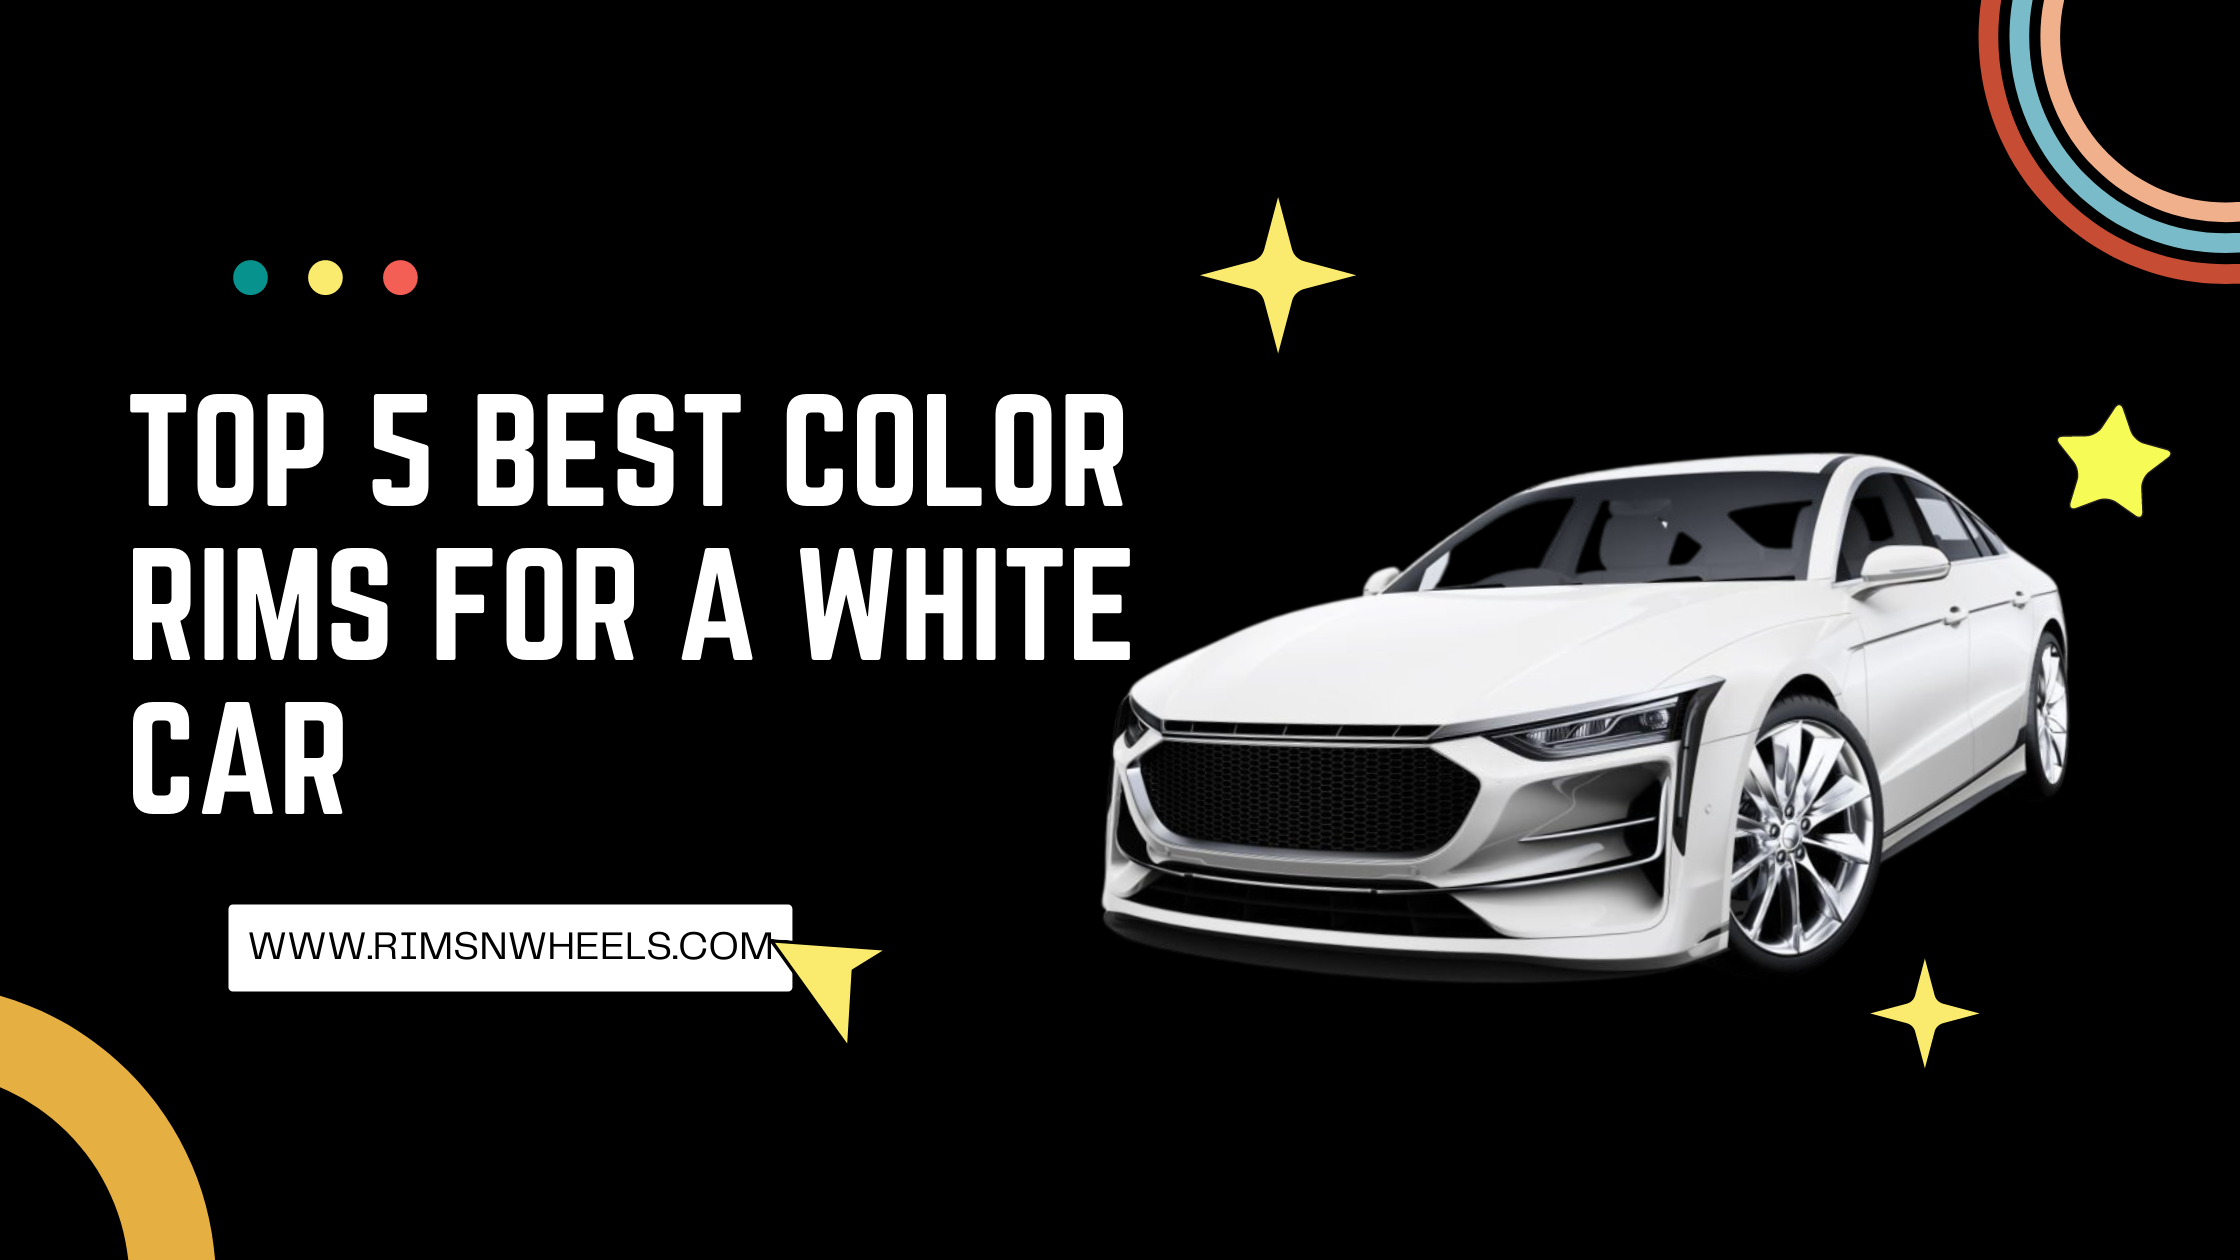 Top 5 Best Color Rims For A White Car {Updated 2022}